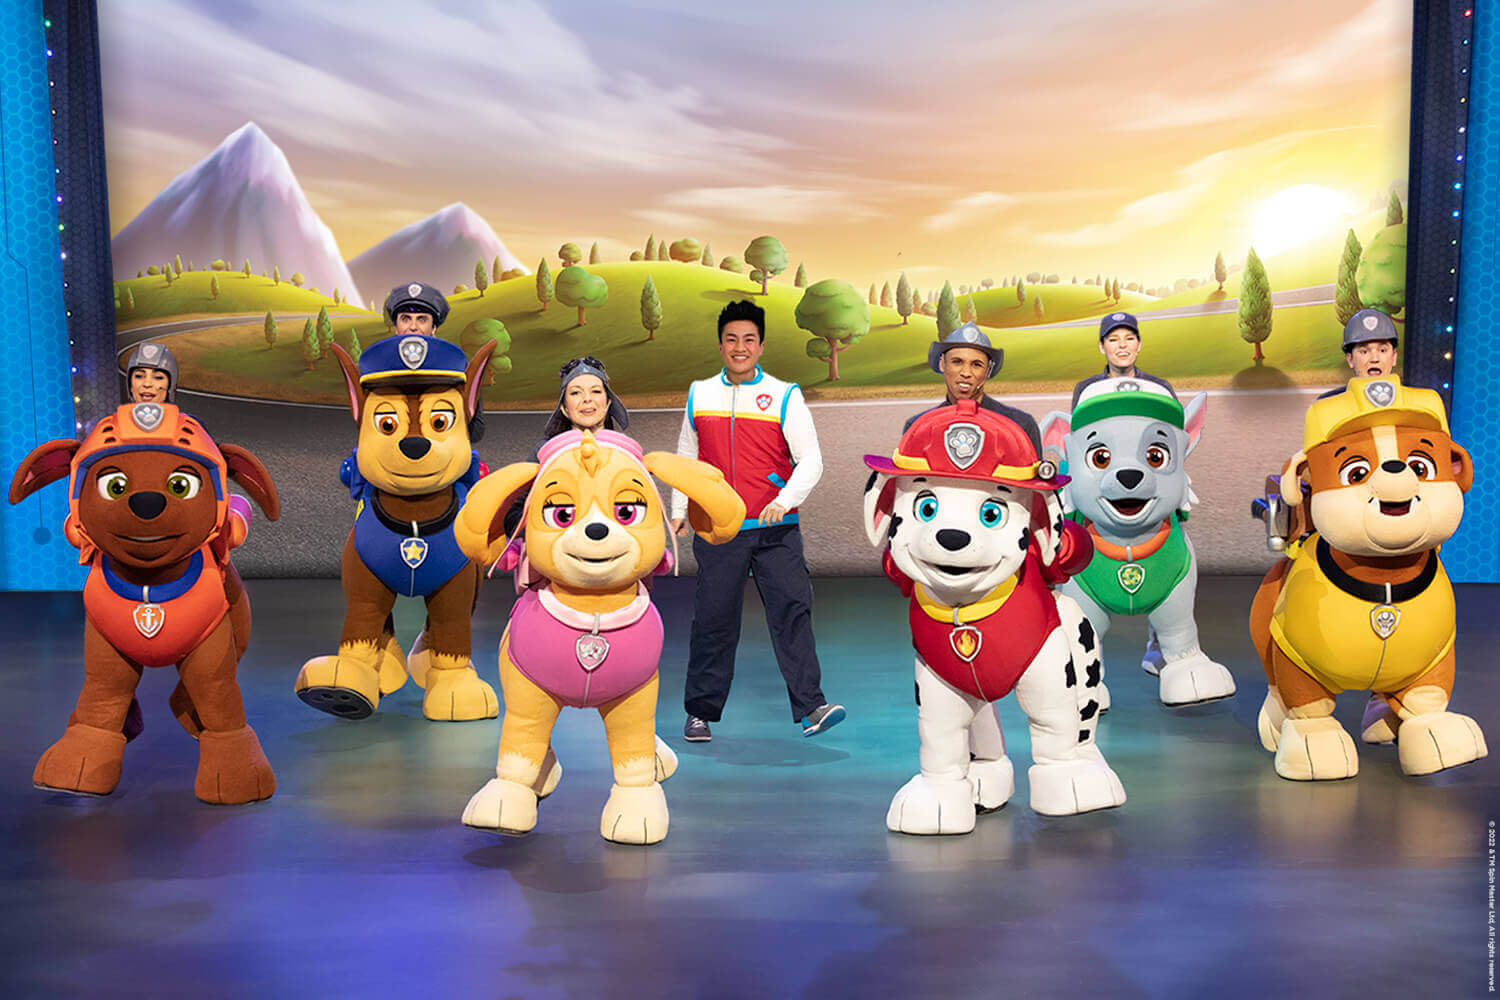 PAW Patrol Live! Heroes Unite  Show Details, Characters, & More!